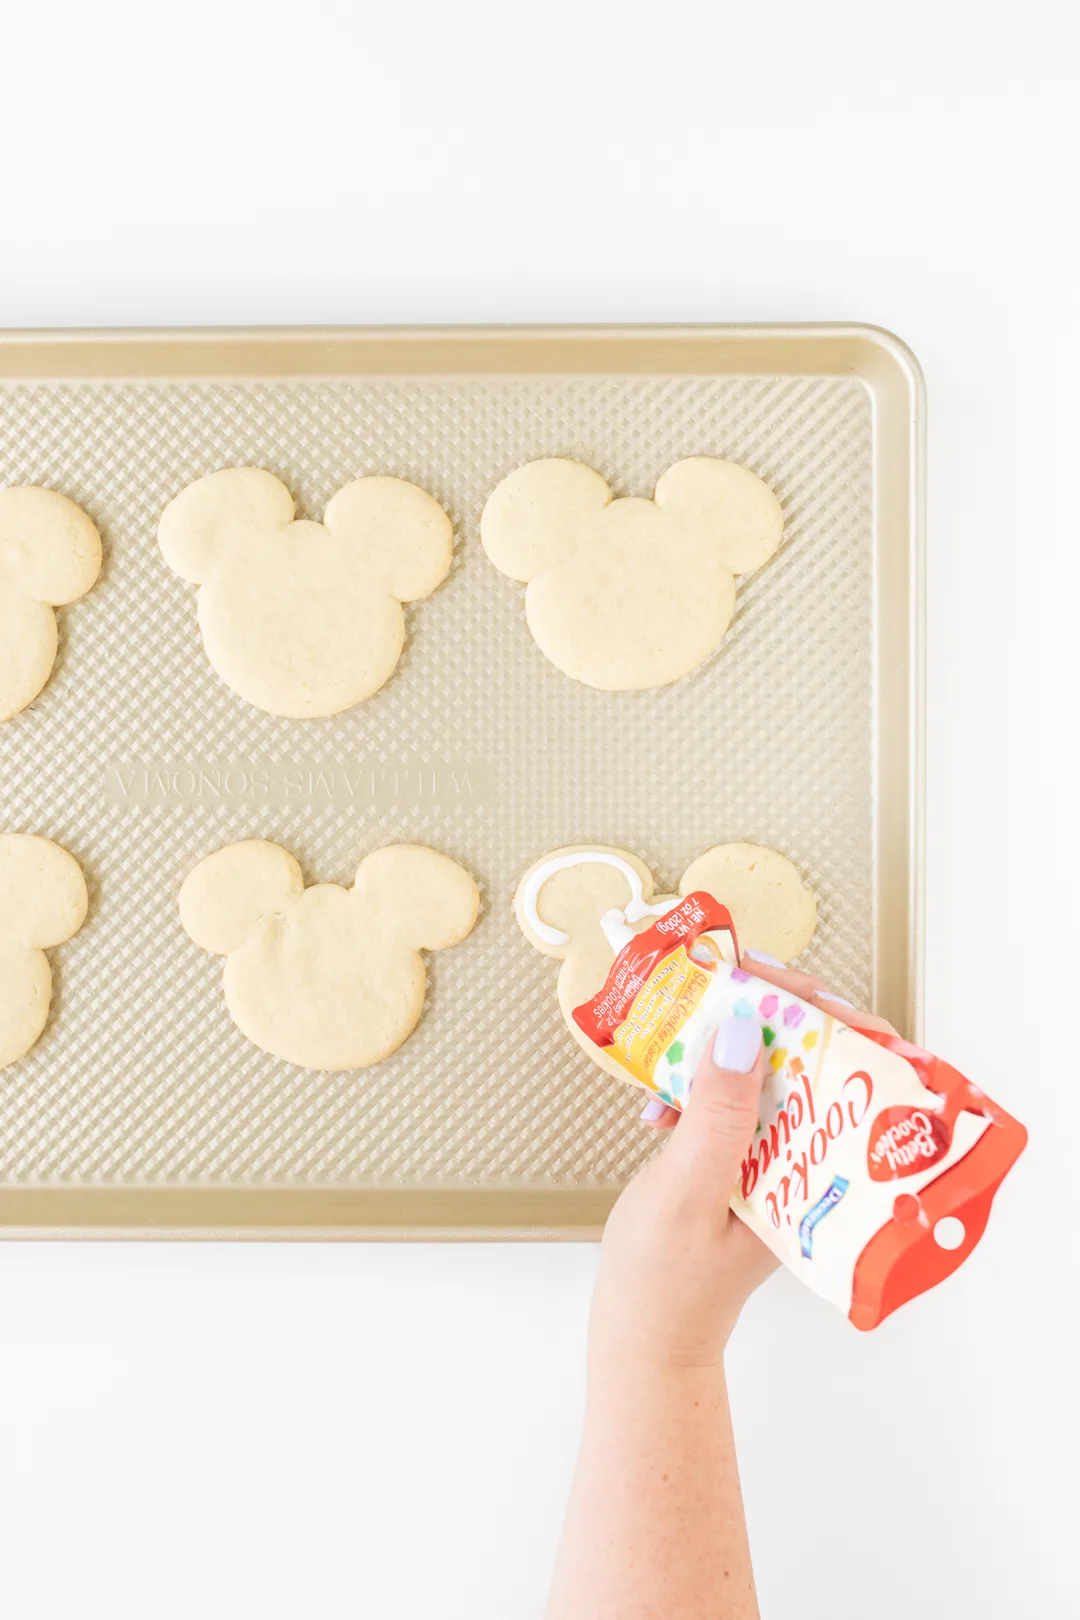 Adding icing to Mickey Mouse Cookies